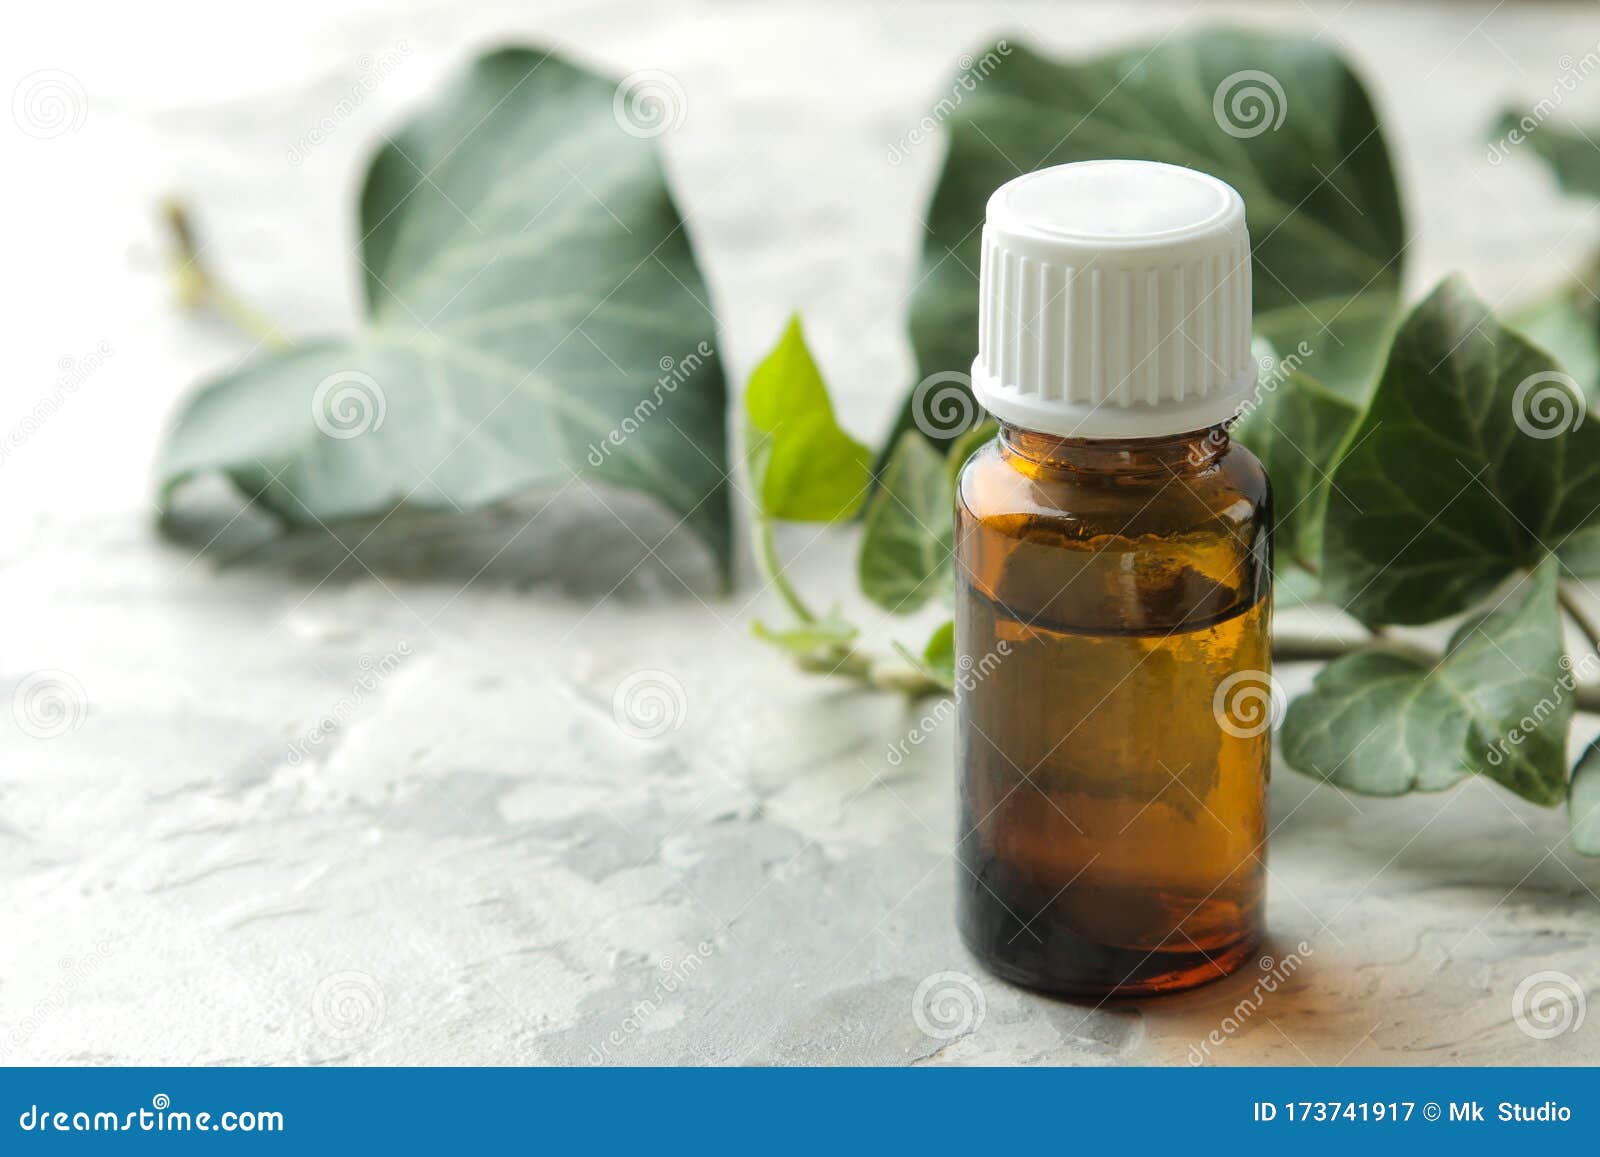 A Leaf of Ivy and Syrup in a Bottle on a Light Concrete Table ...